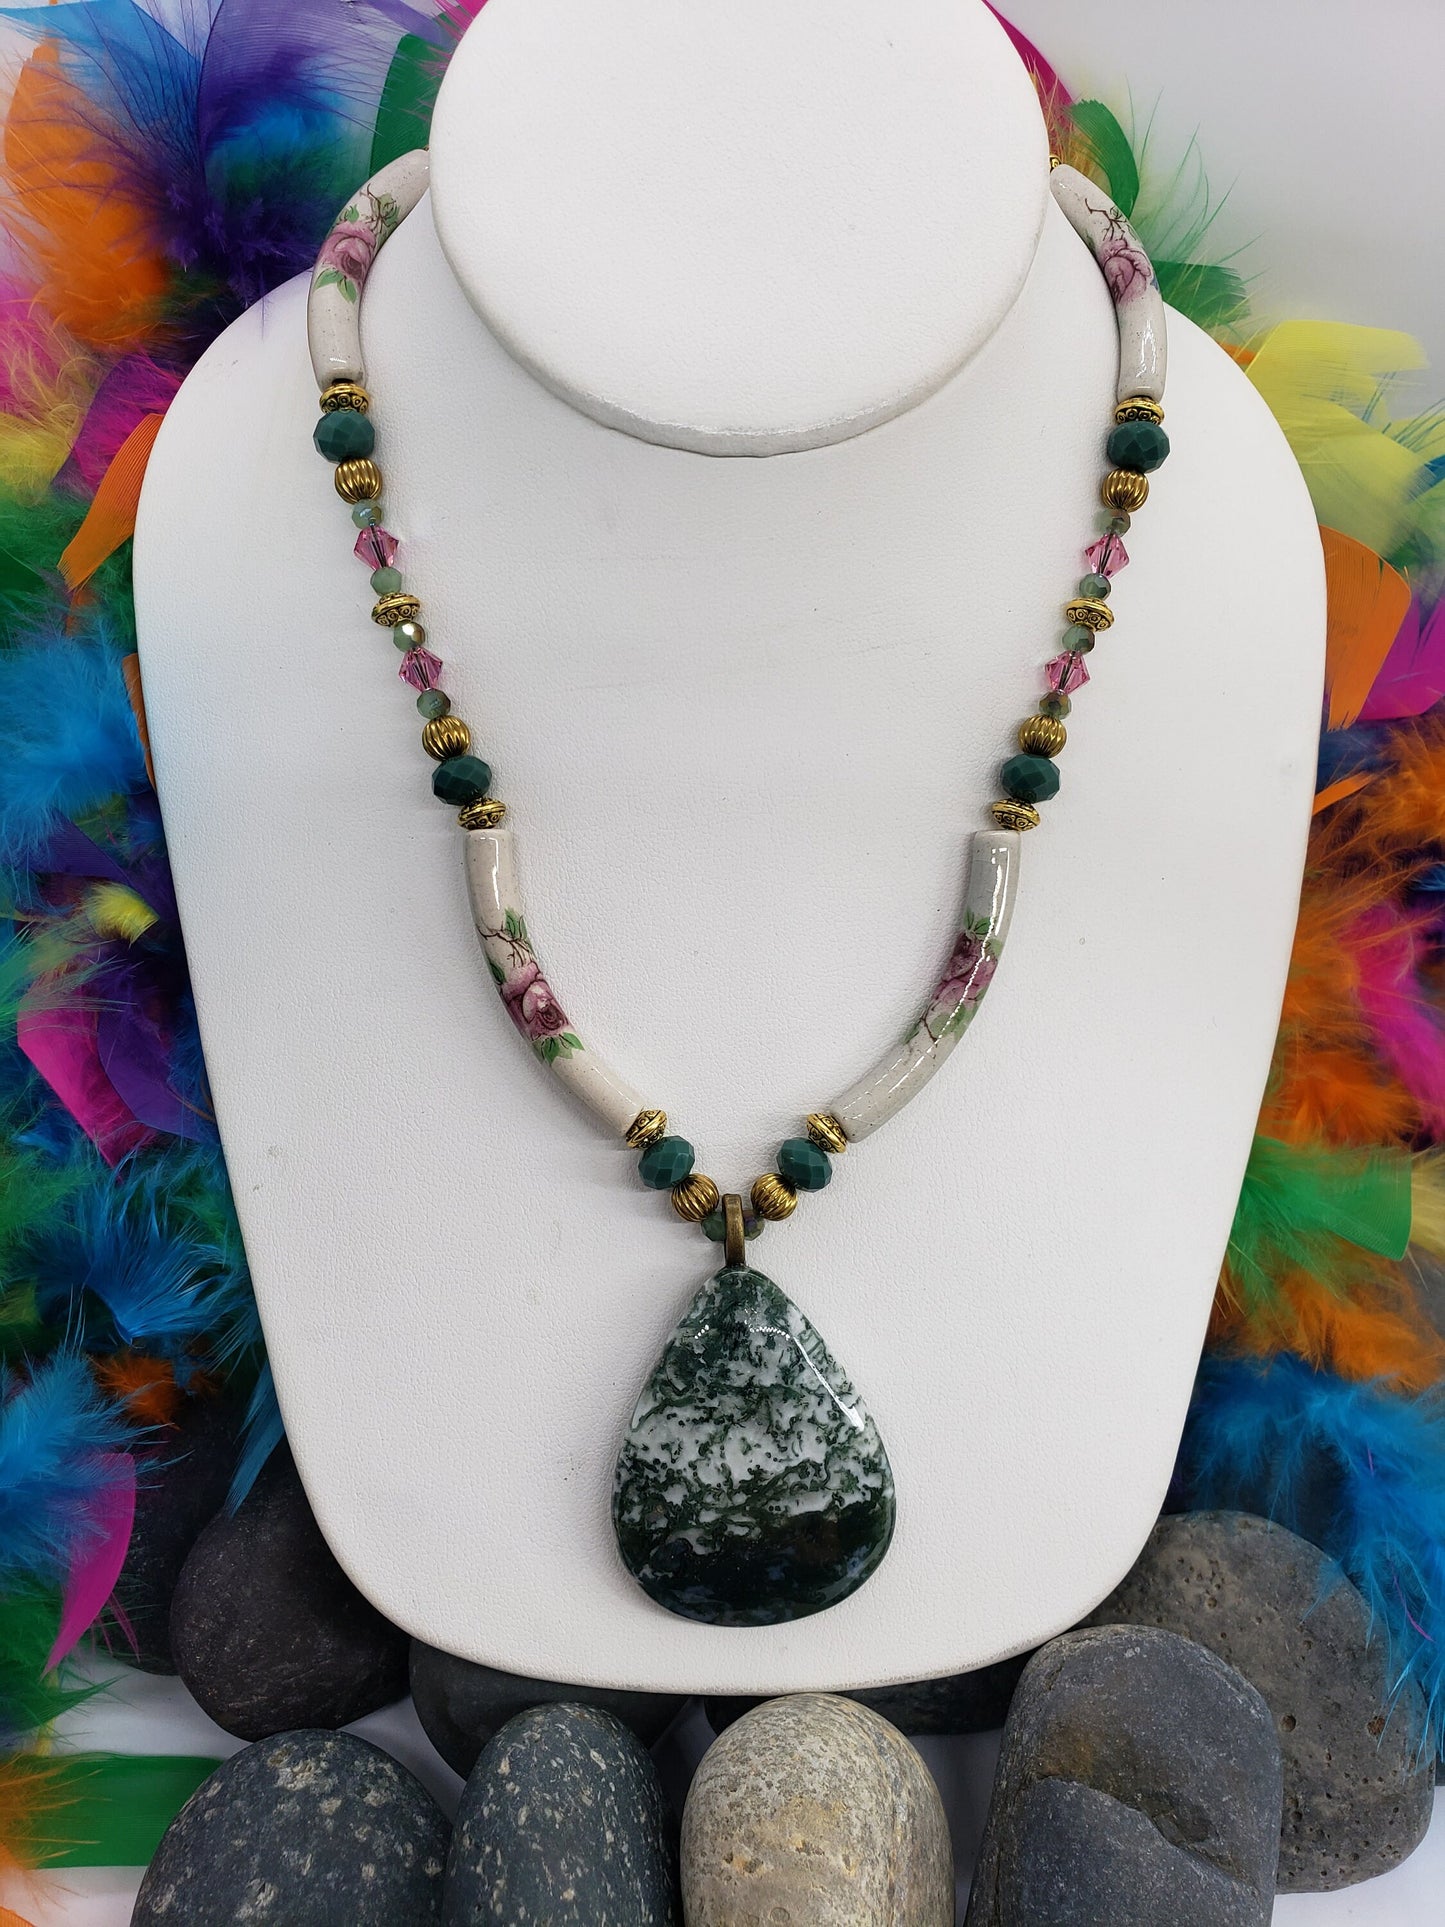 Tree Agate Pendant on Porcelain Tube and Beaded Necklace